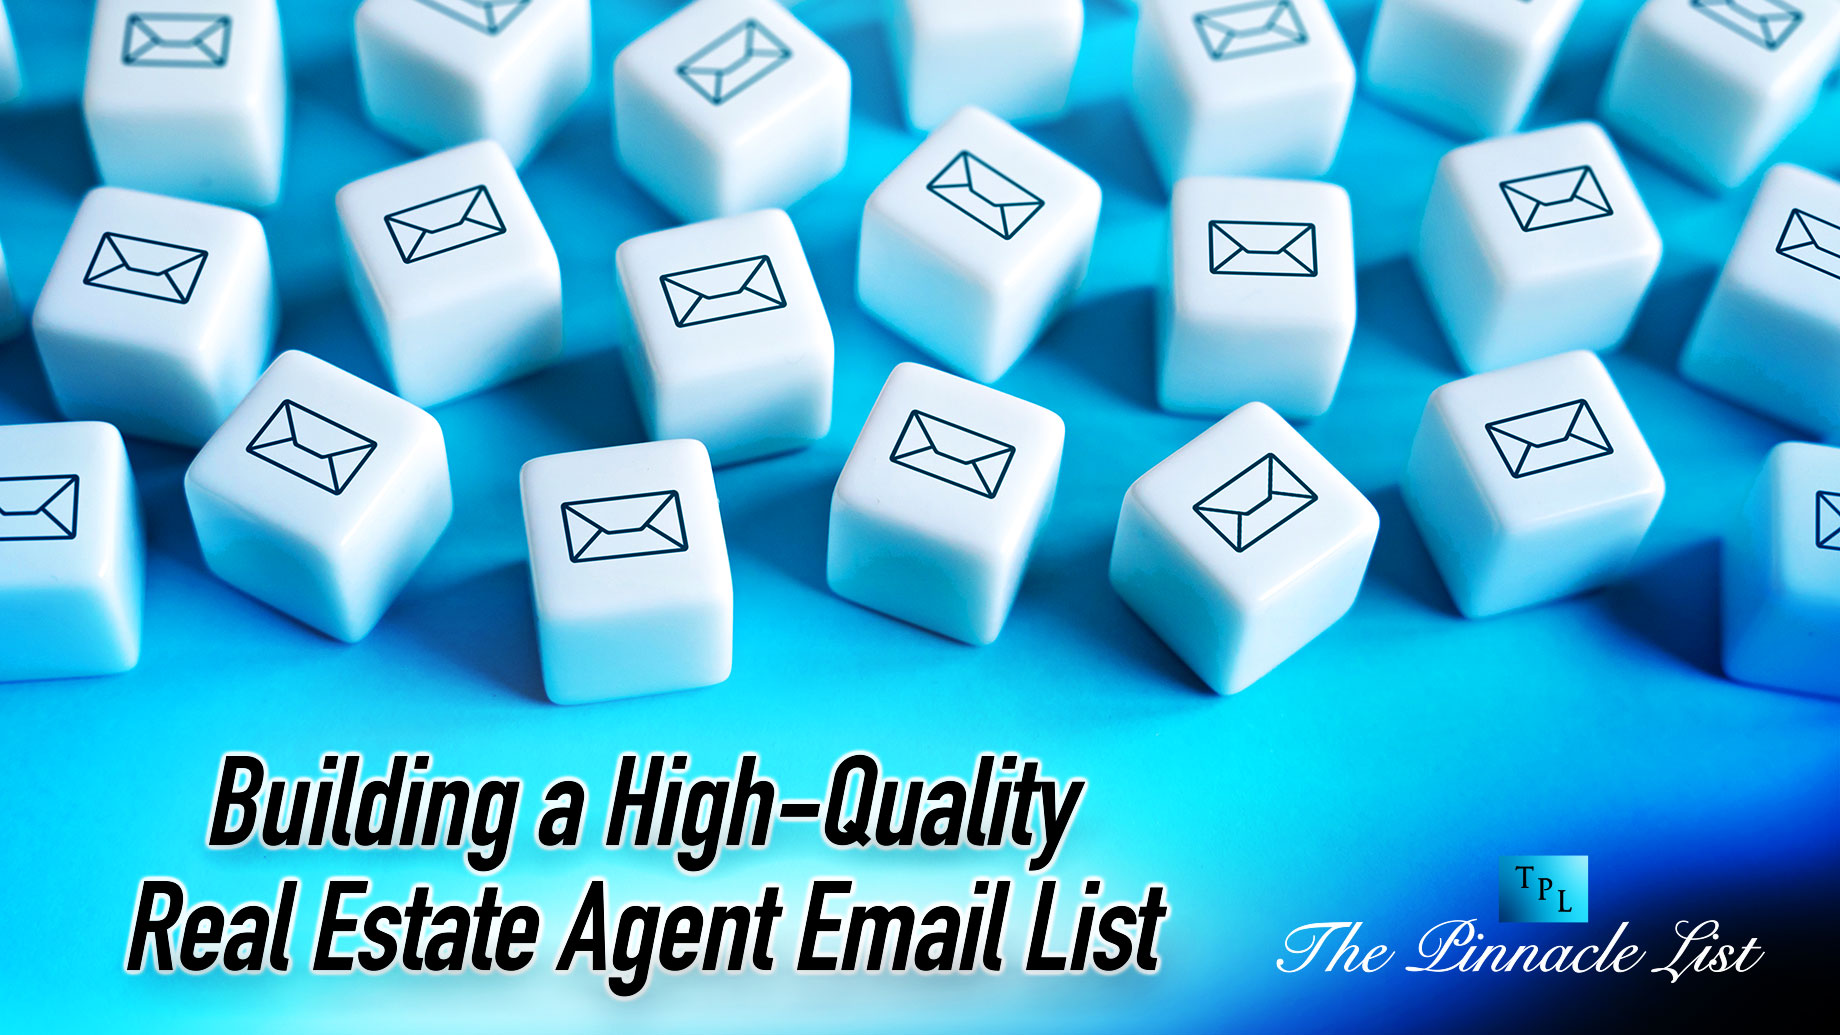 Building a High-Quality Real Estate Agent Email List